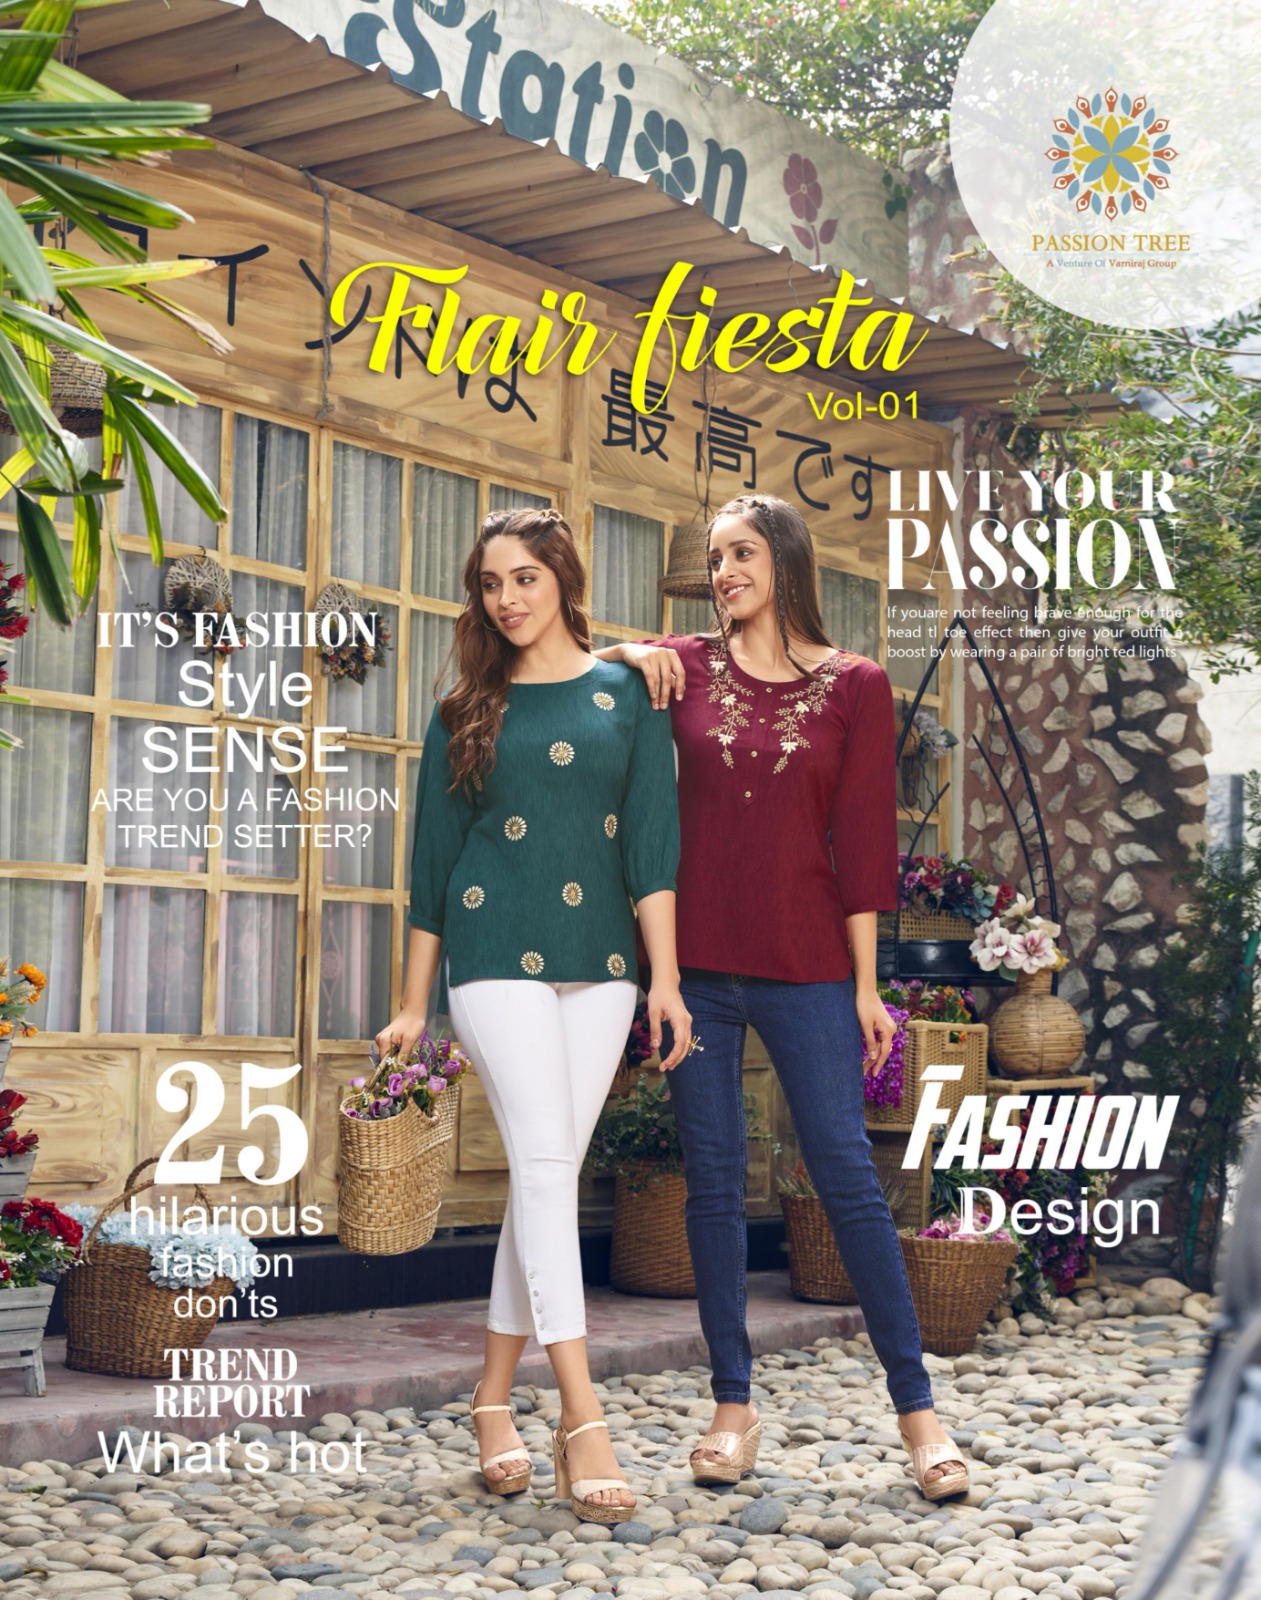 Passion Tree Flair Fiesta Vol 1 collection 11